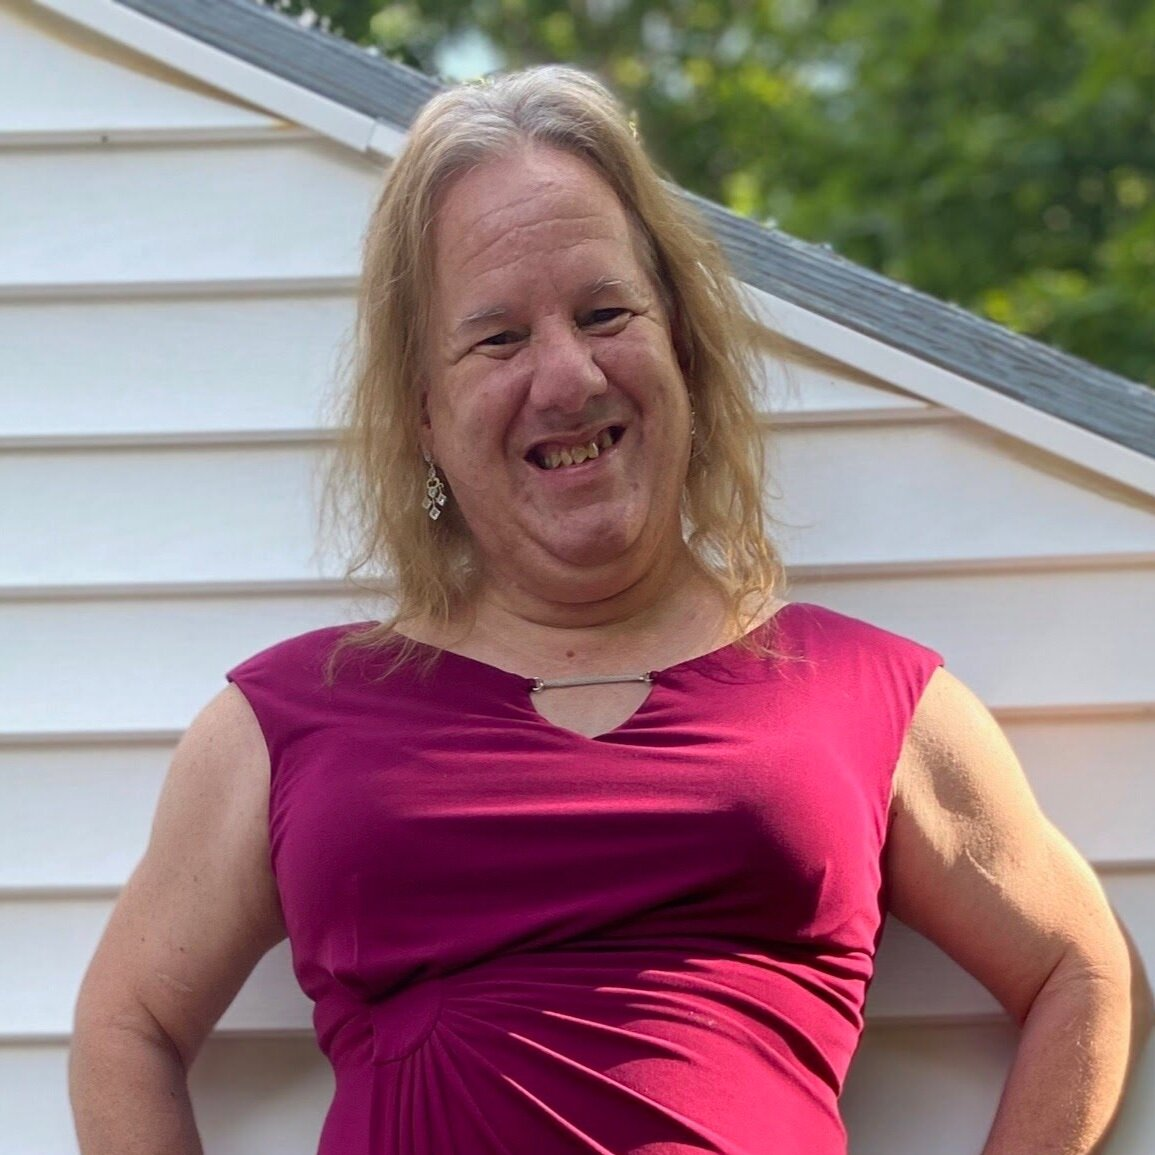 A woman in a bright pink sleeveless blouse stands smiling with her arms on her hips. She has blonde hair and behind her is the siding of a house. 